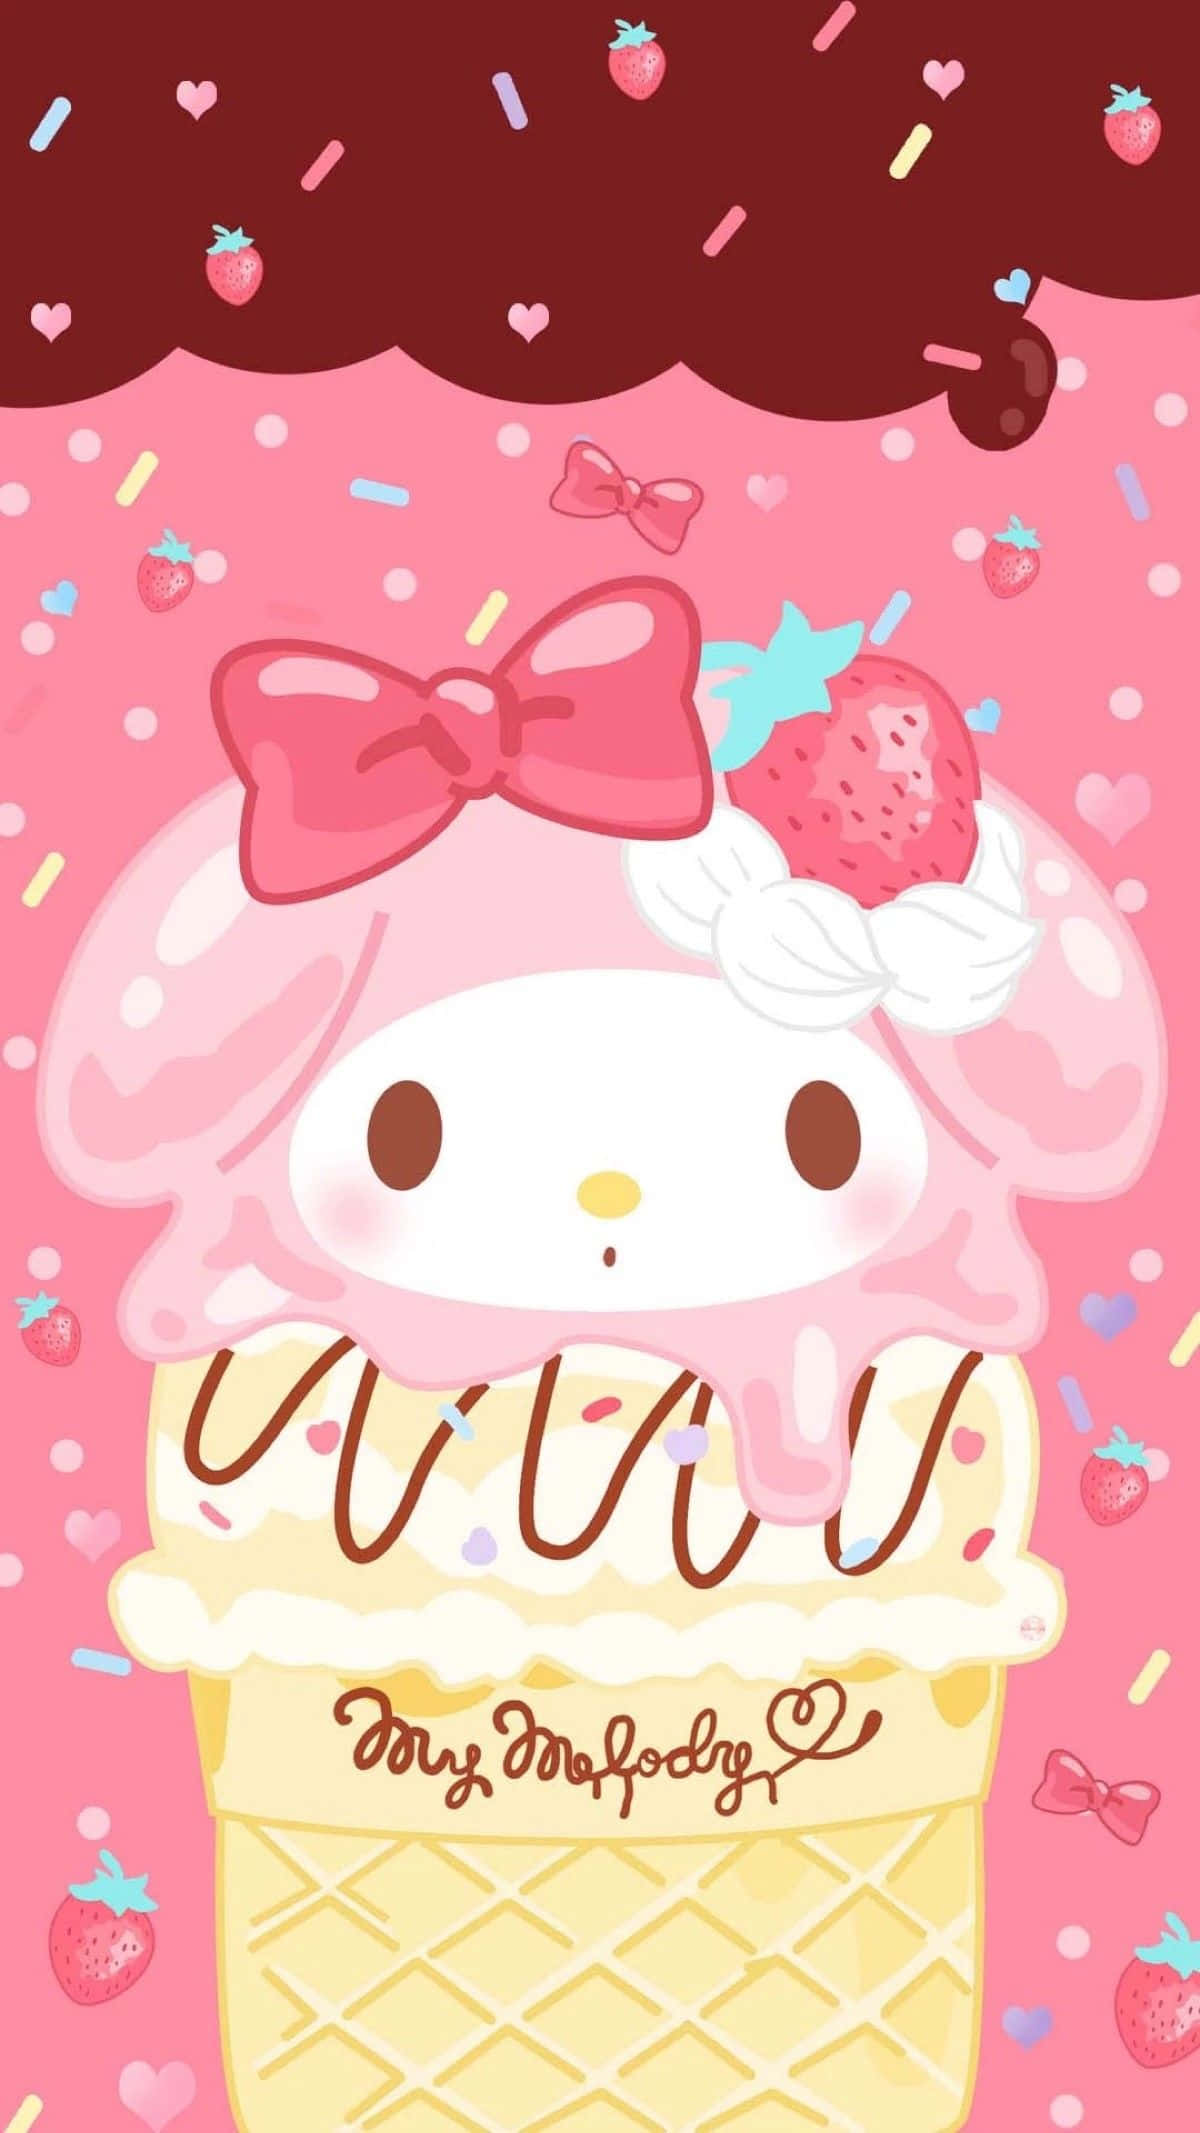 Bring joy to your day with My Melody